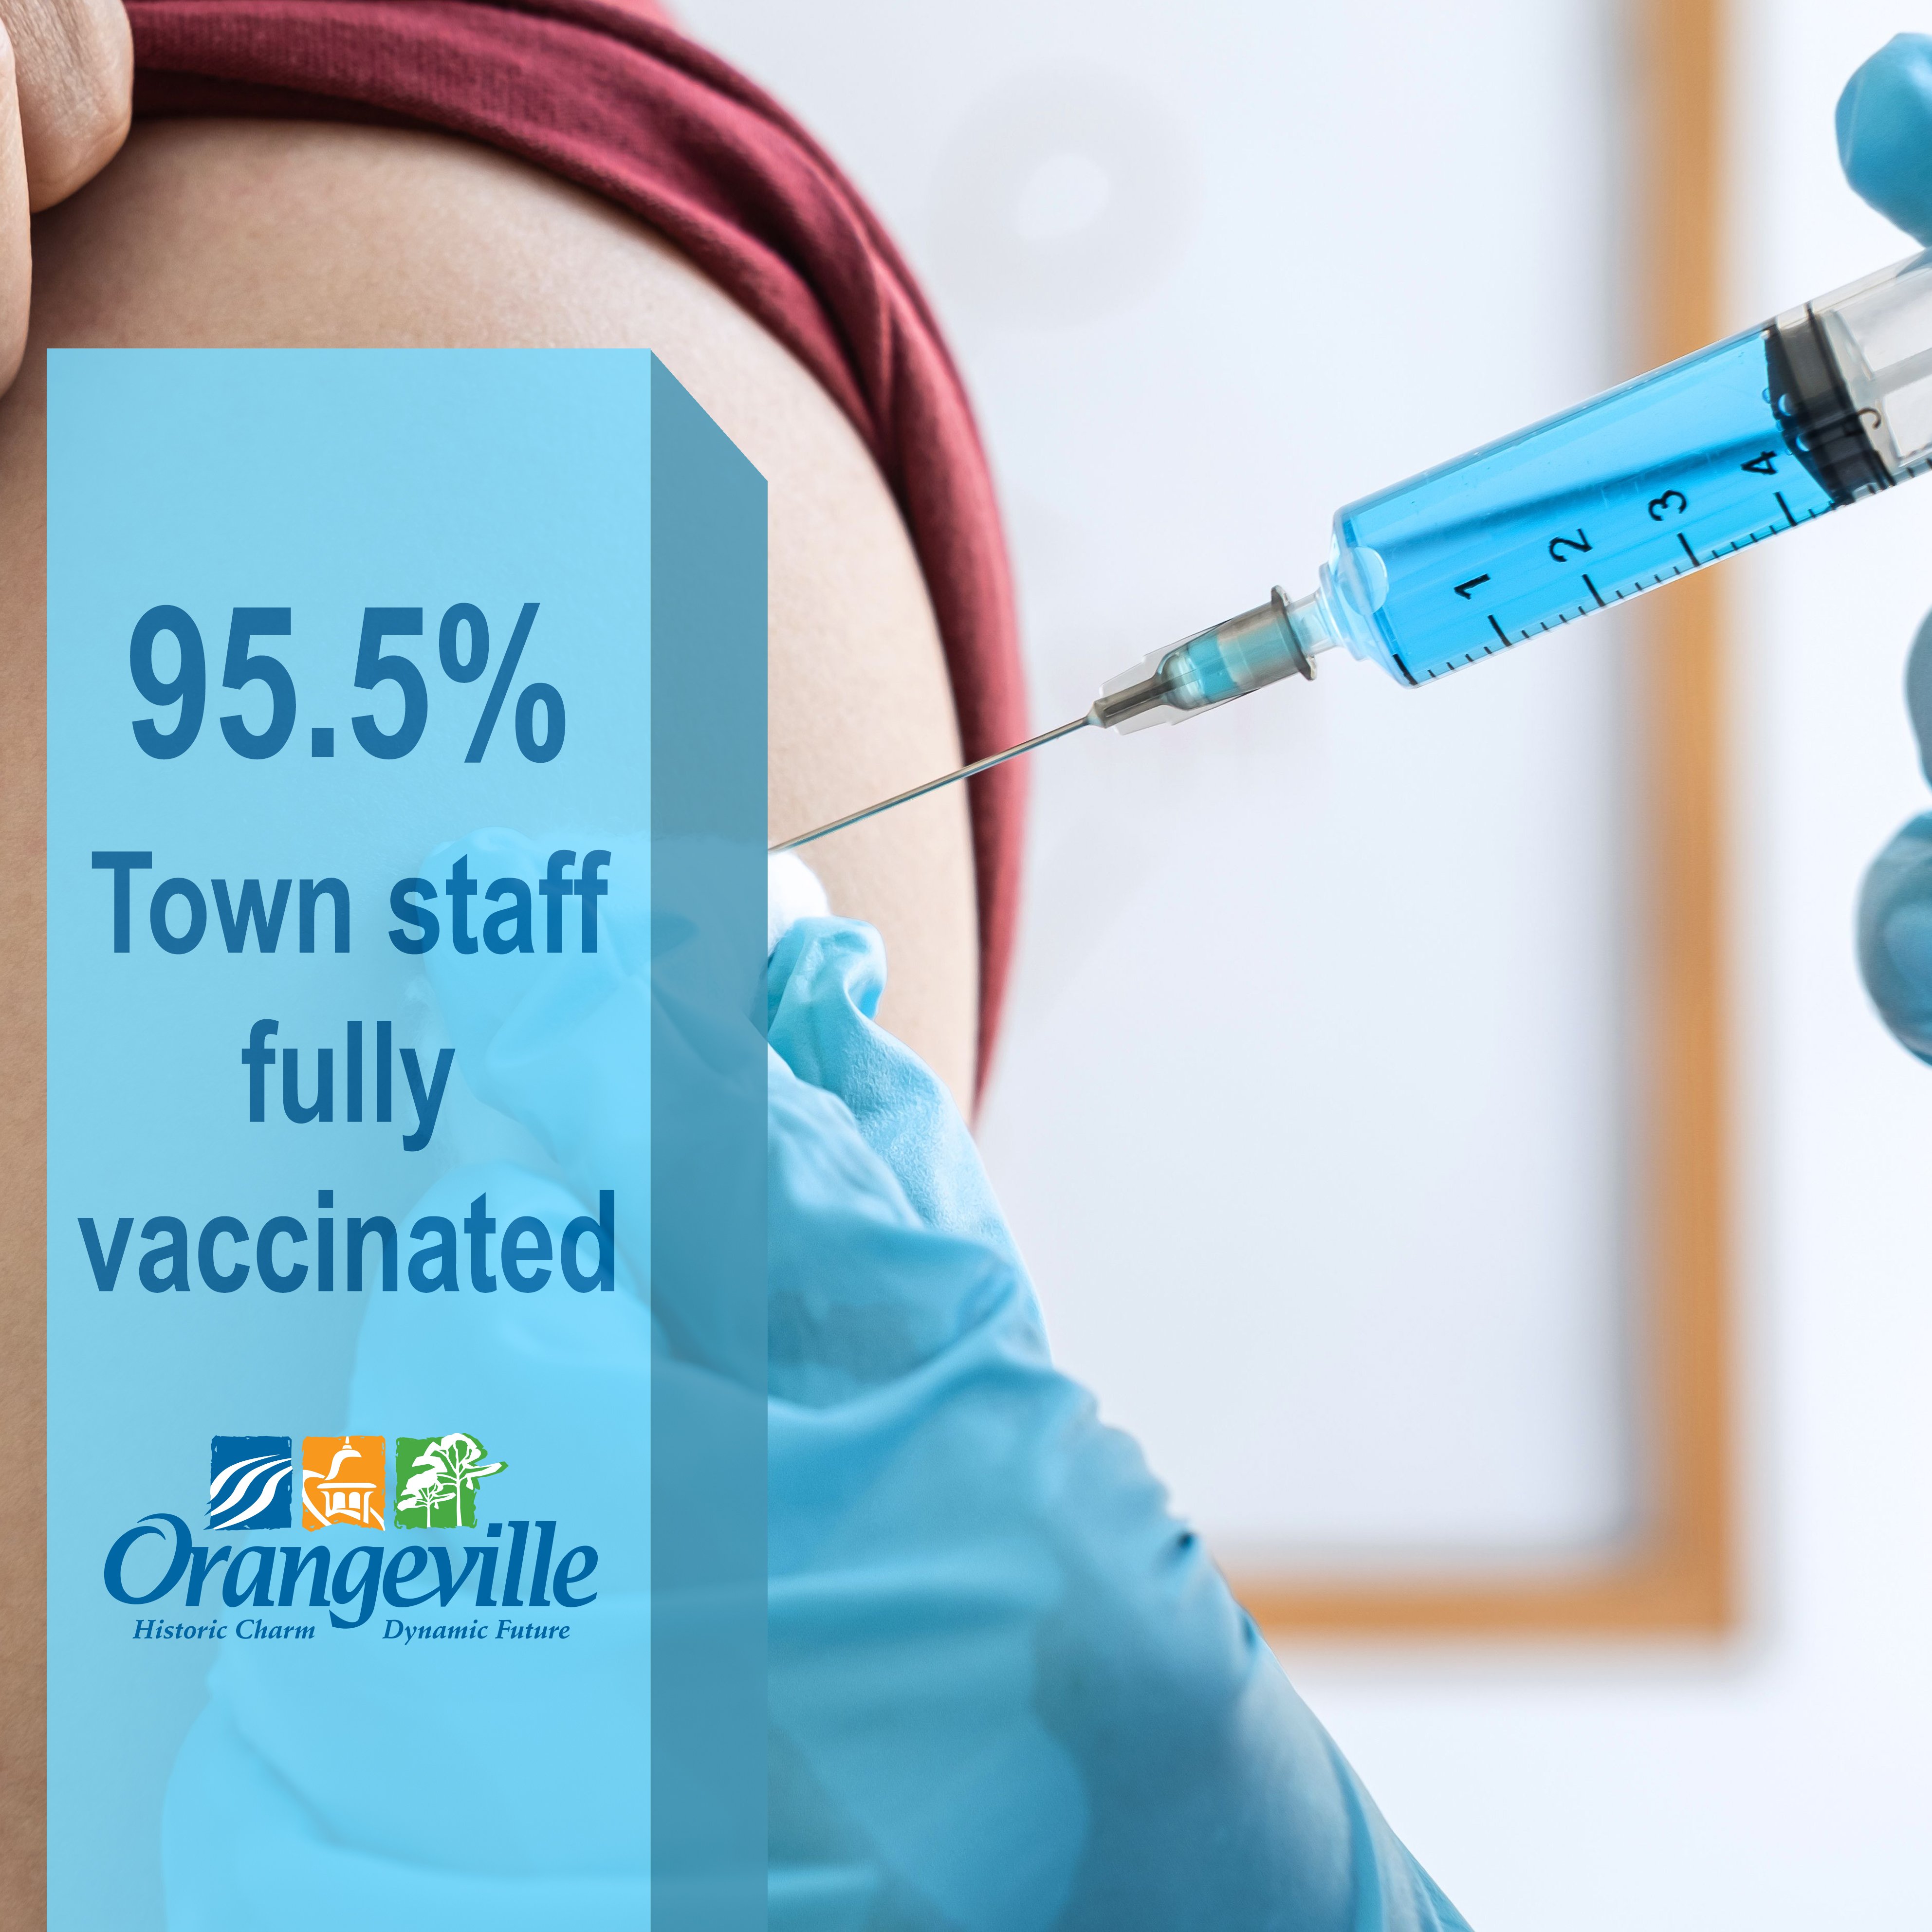 95.5% of Town staff are fully vaccinated